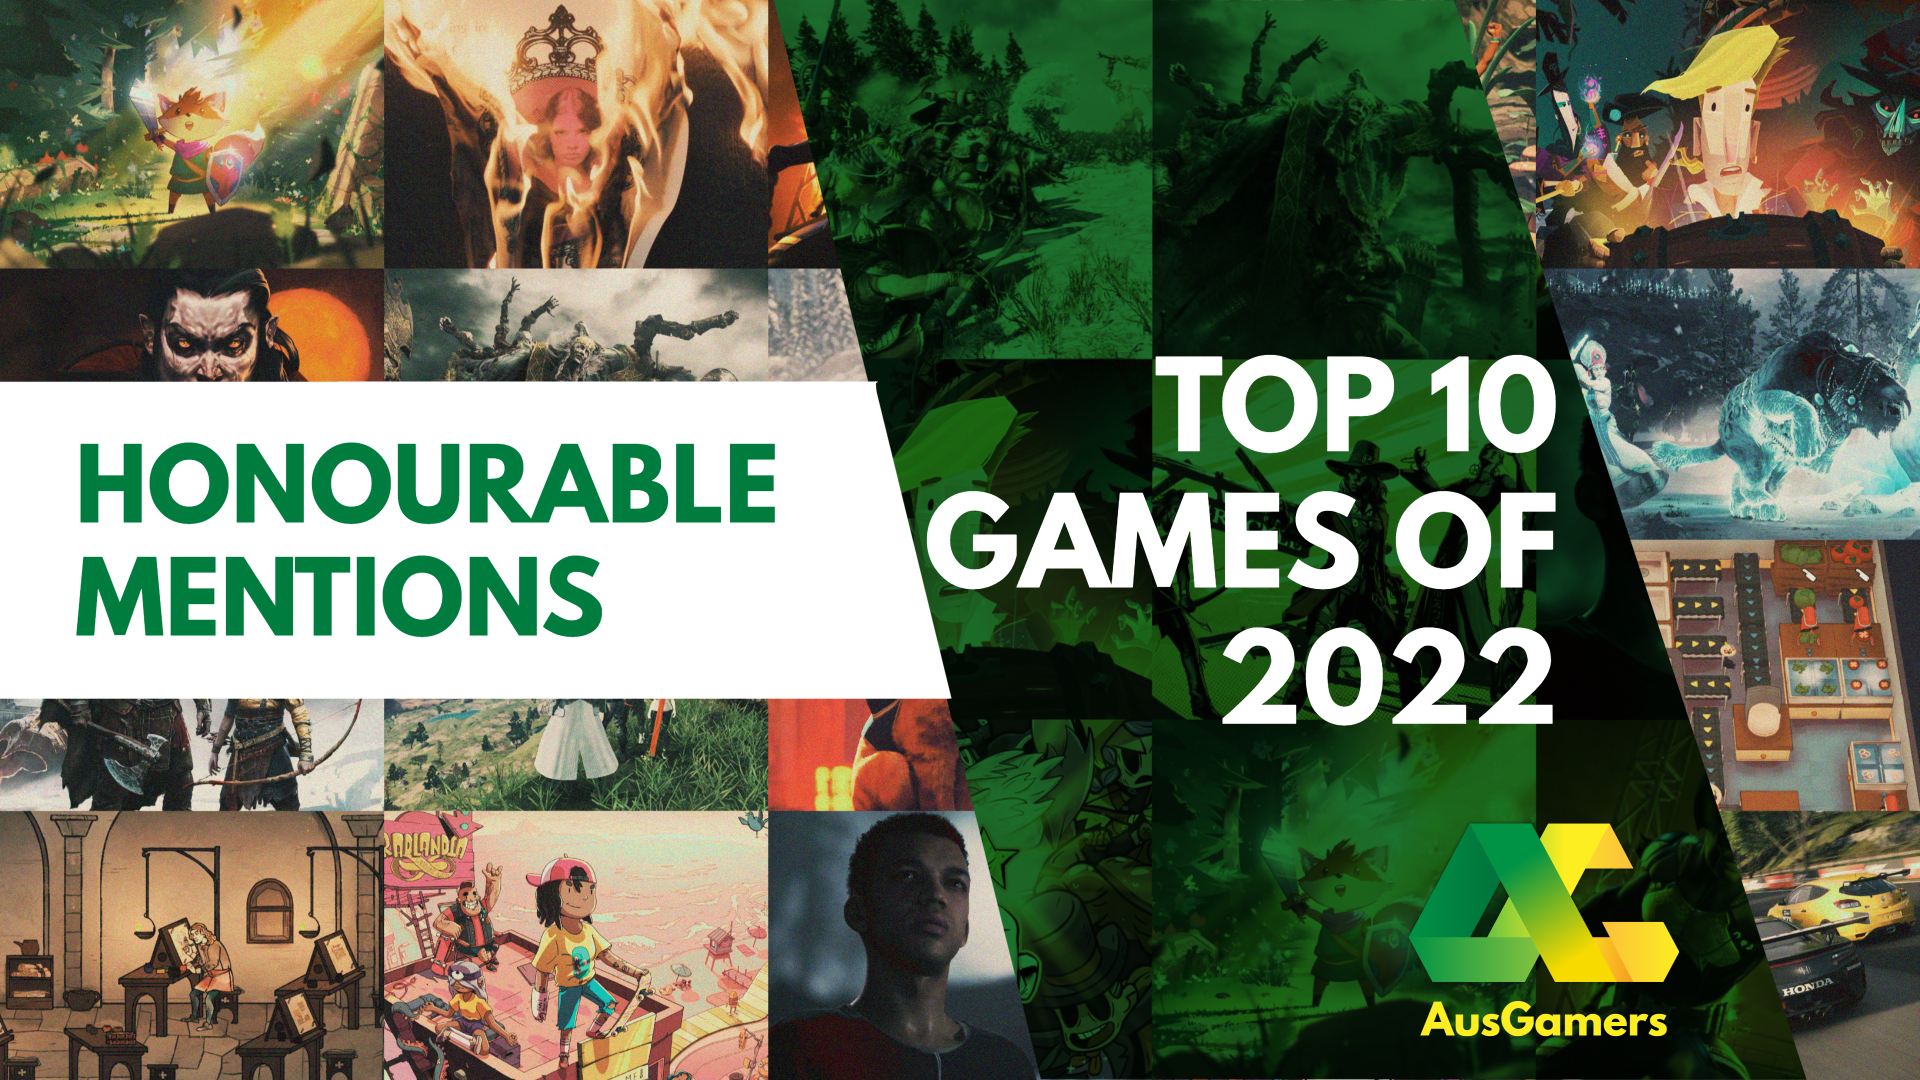 AusGamers Top 10 Games of 2022 - Honourable Mentions 